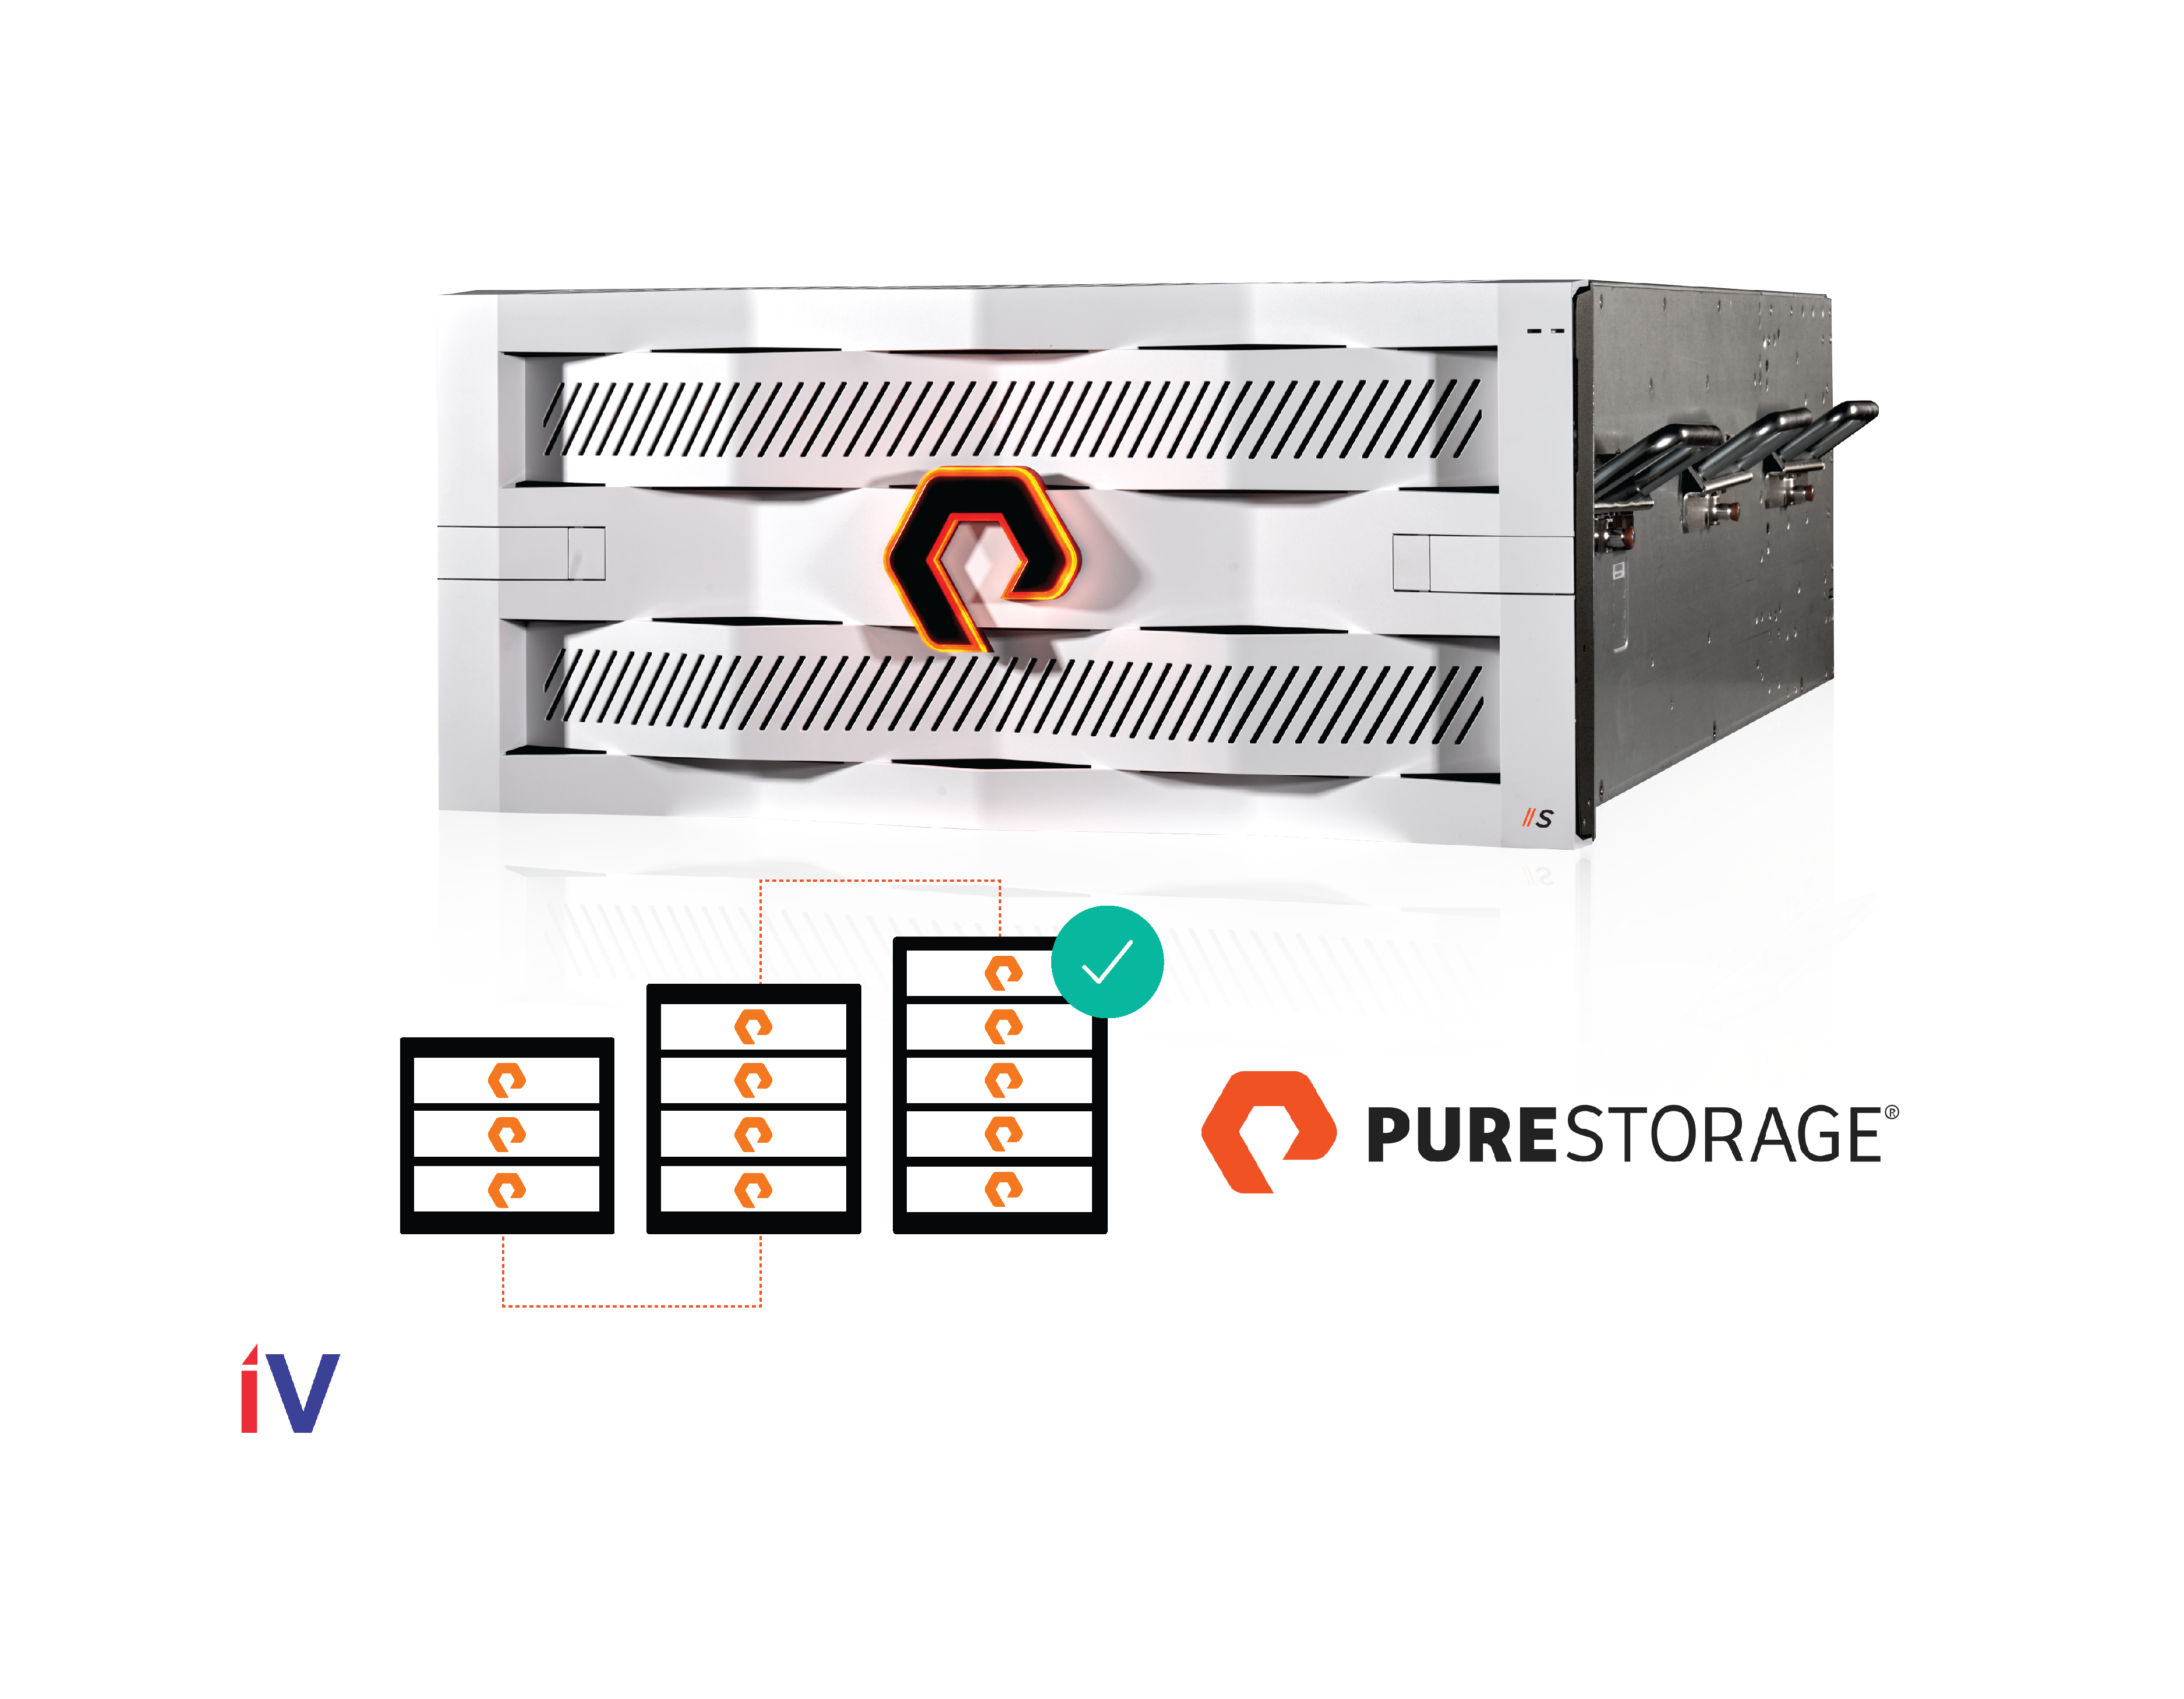 Pure Storage Introduces FlashBlade//S: A Revolutionary Platform That Addresses the Demands of Unstructured Data and Modern Application Growth